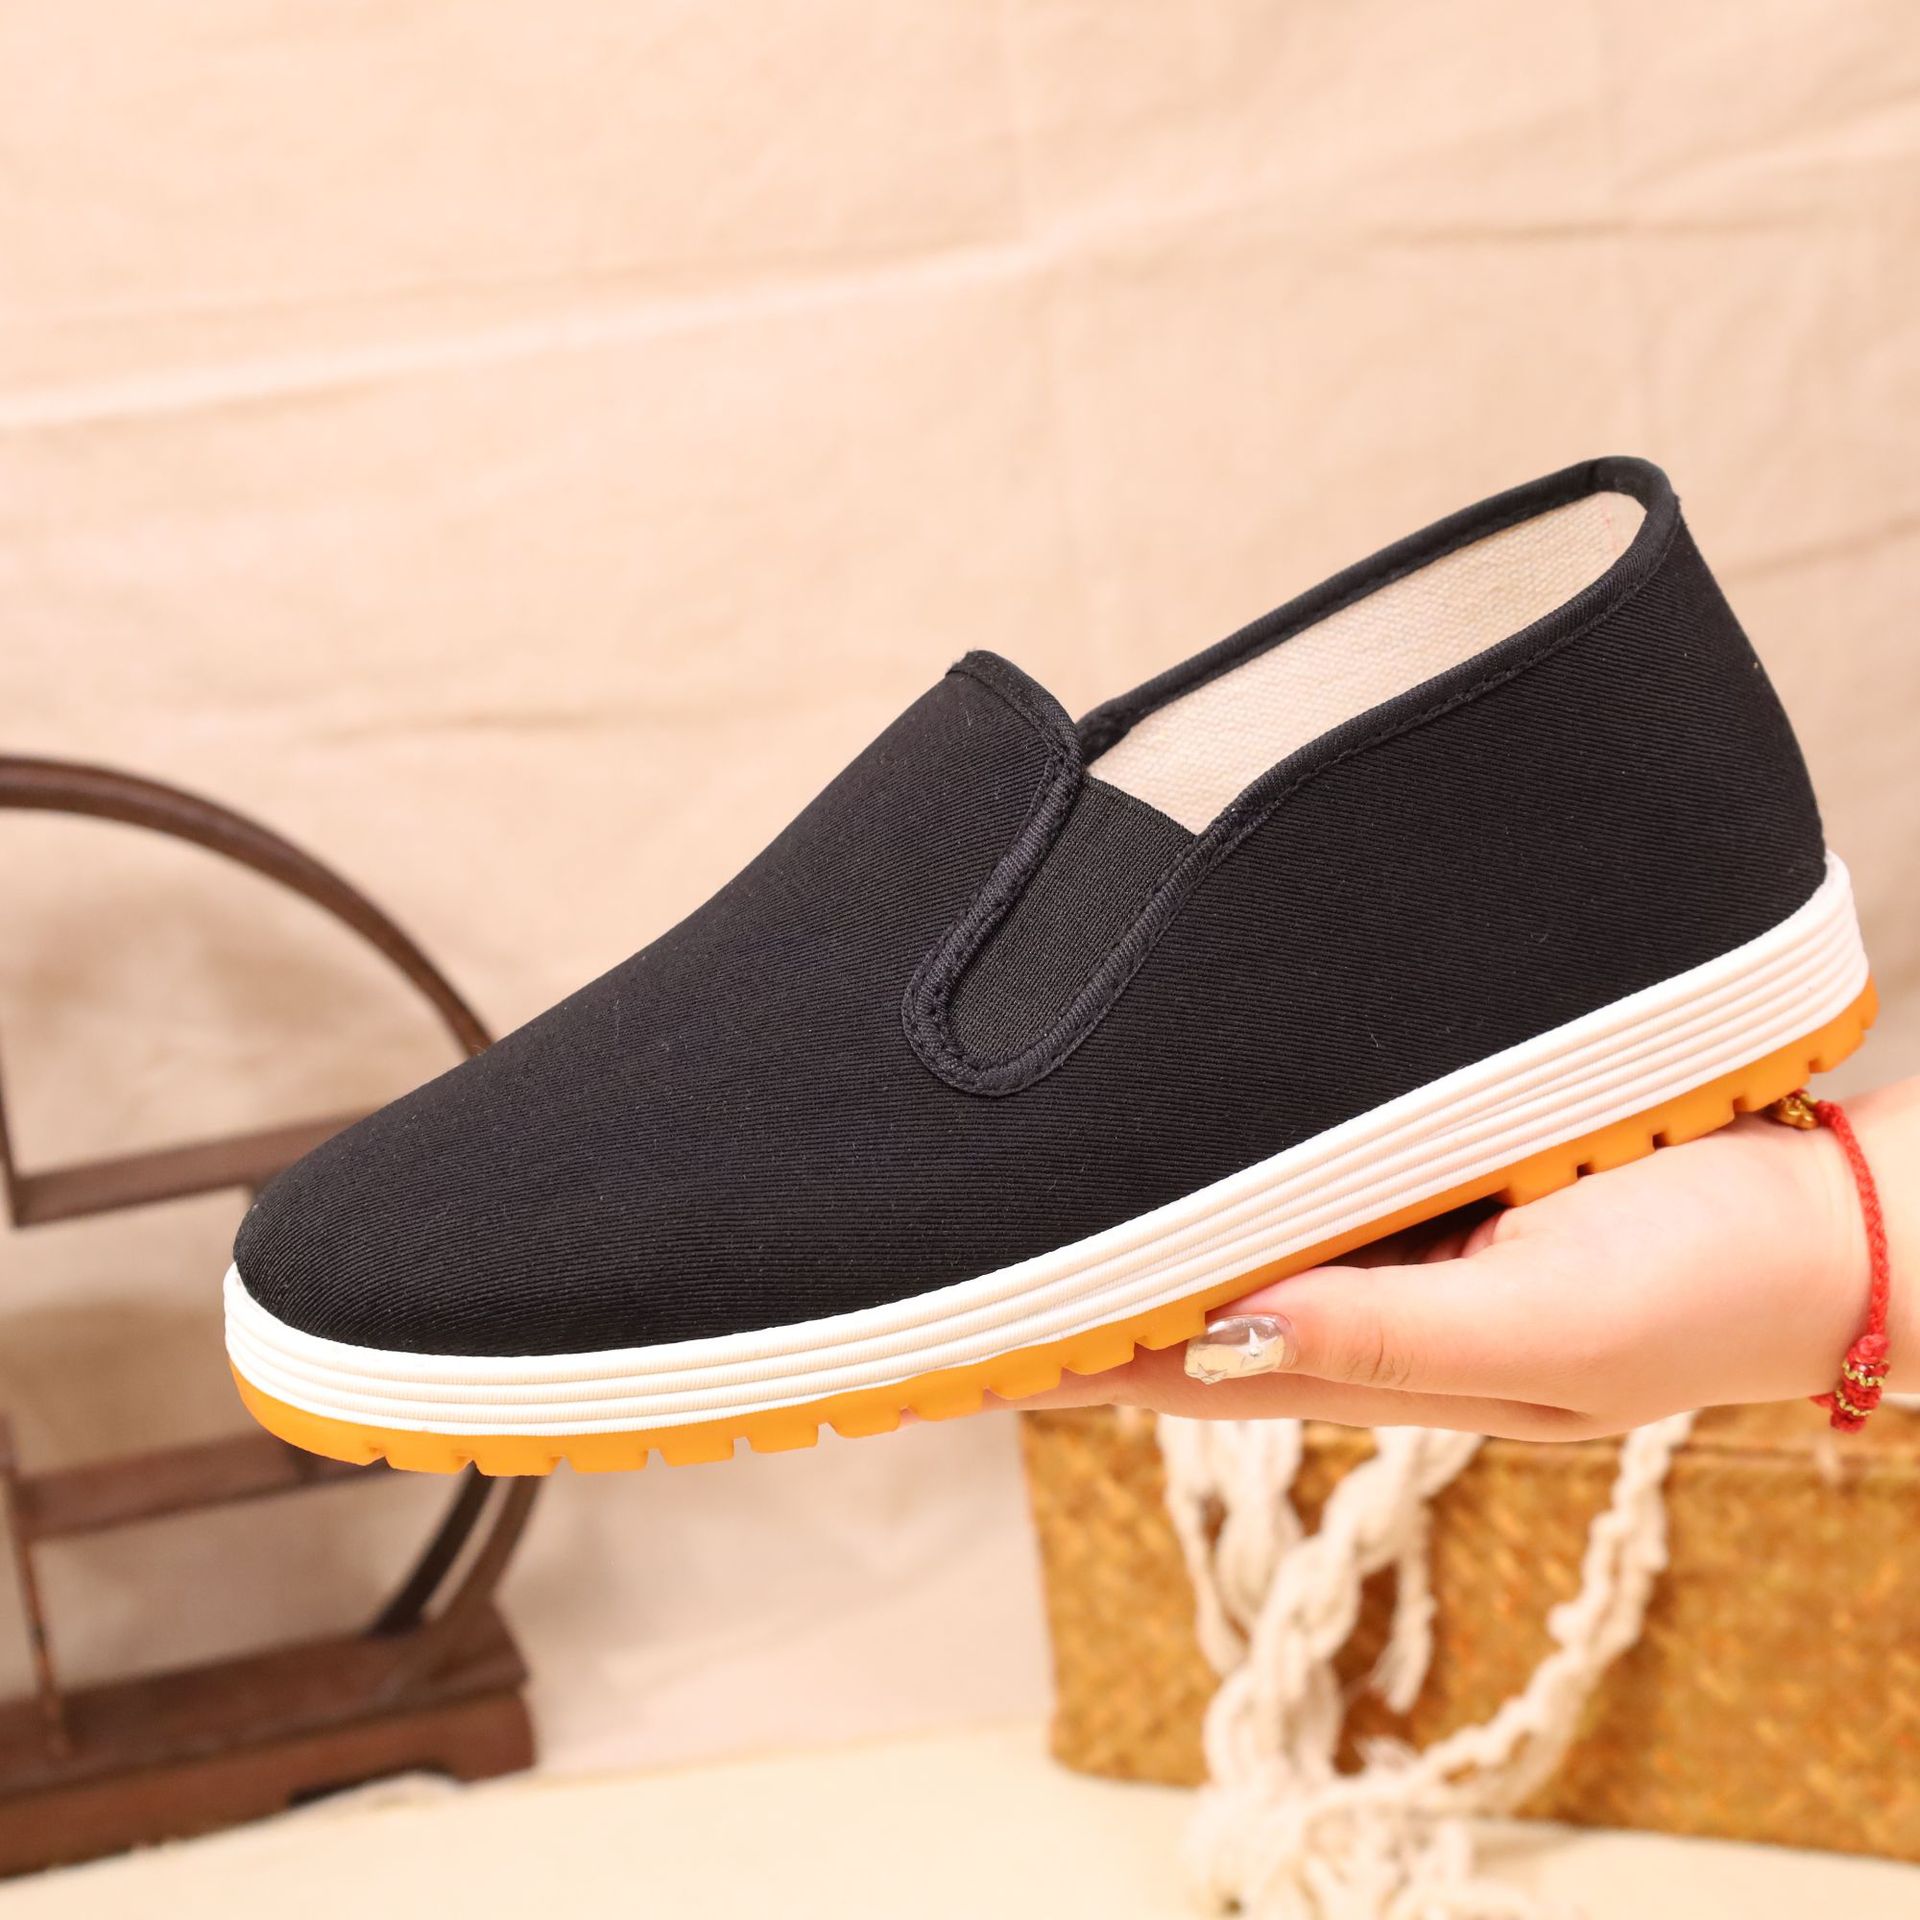 Old Beijing Cloth Shoes Tendon Bottom Cloth Shoes Rubber Shoes Handmade Strong Bottom Black Cloth Shoes Elastic Mouth Casual Canvas Shoes